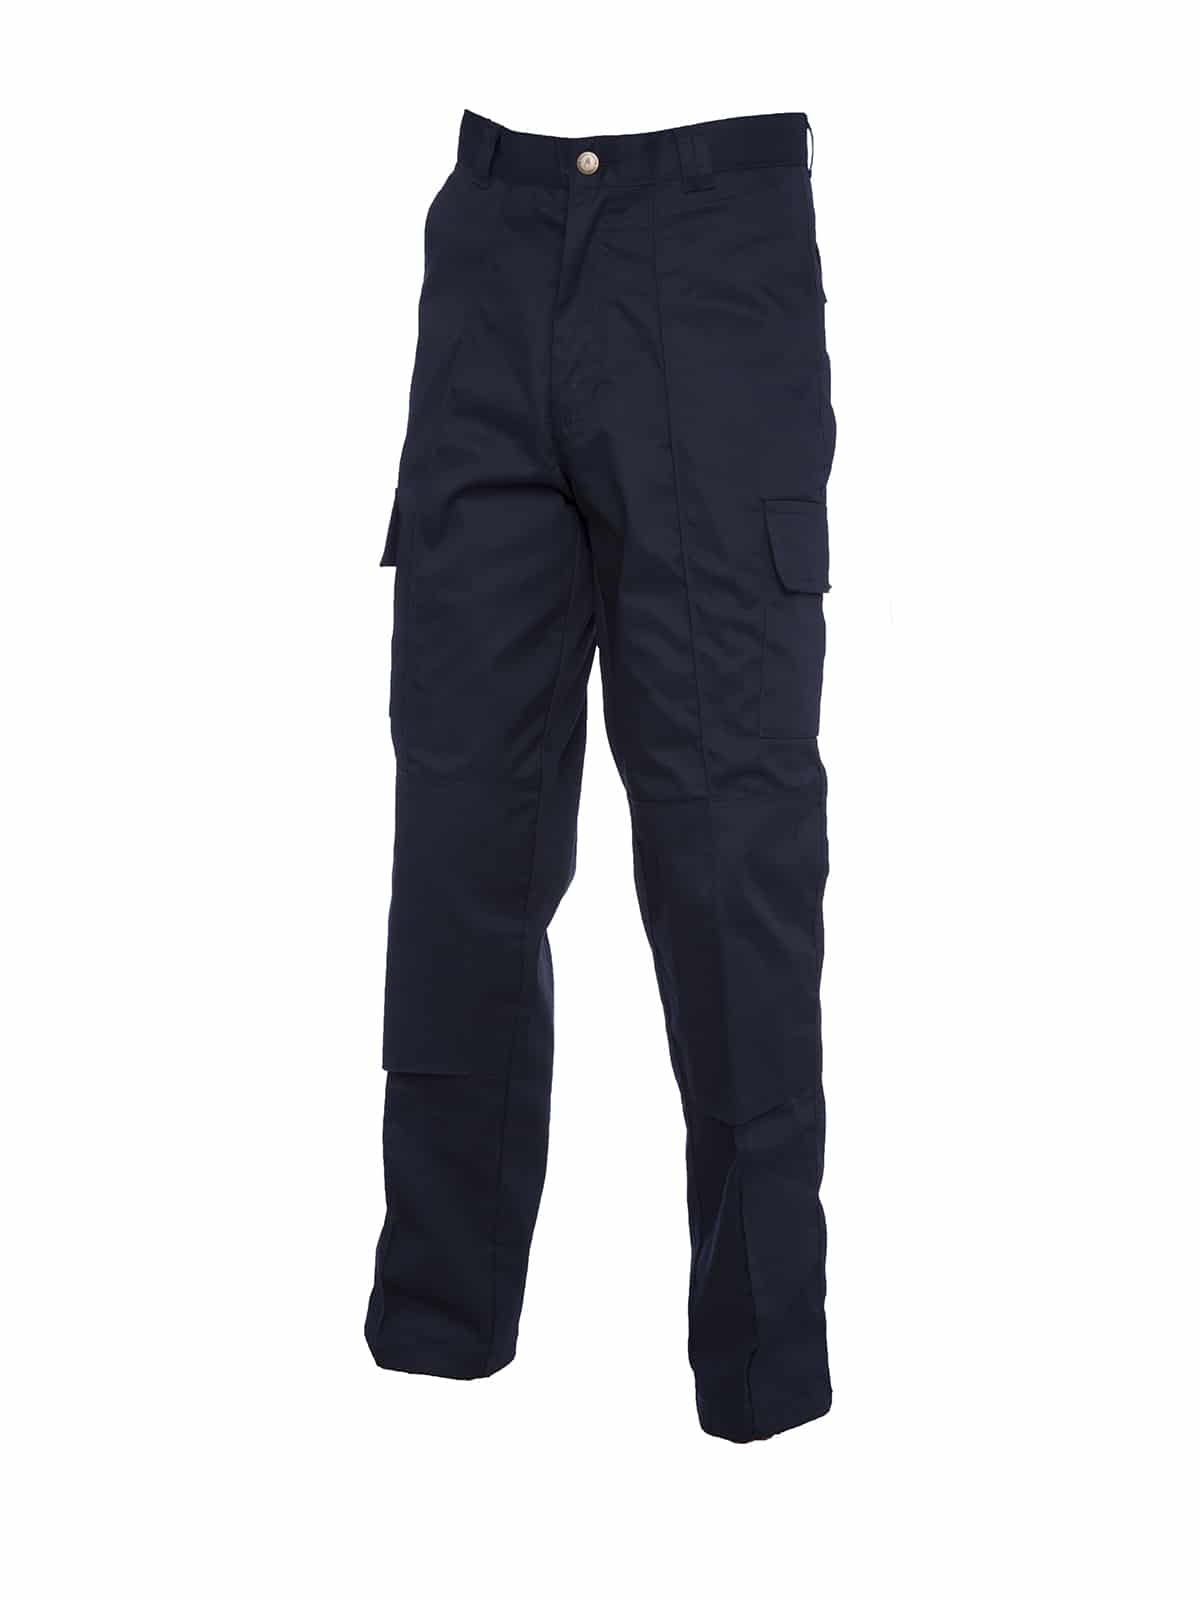 Uneek Cargo Trousers with Knee Pad Pockets – Long